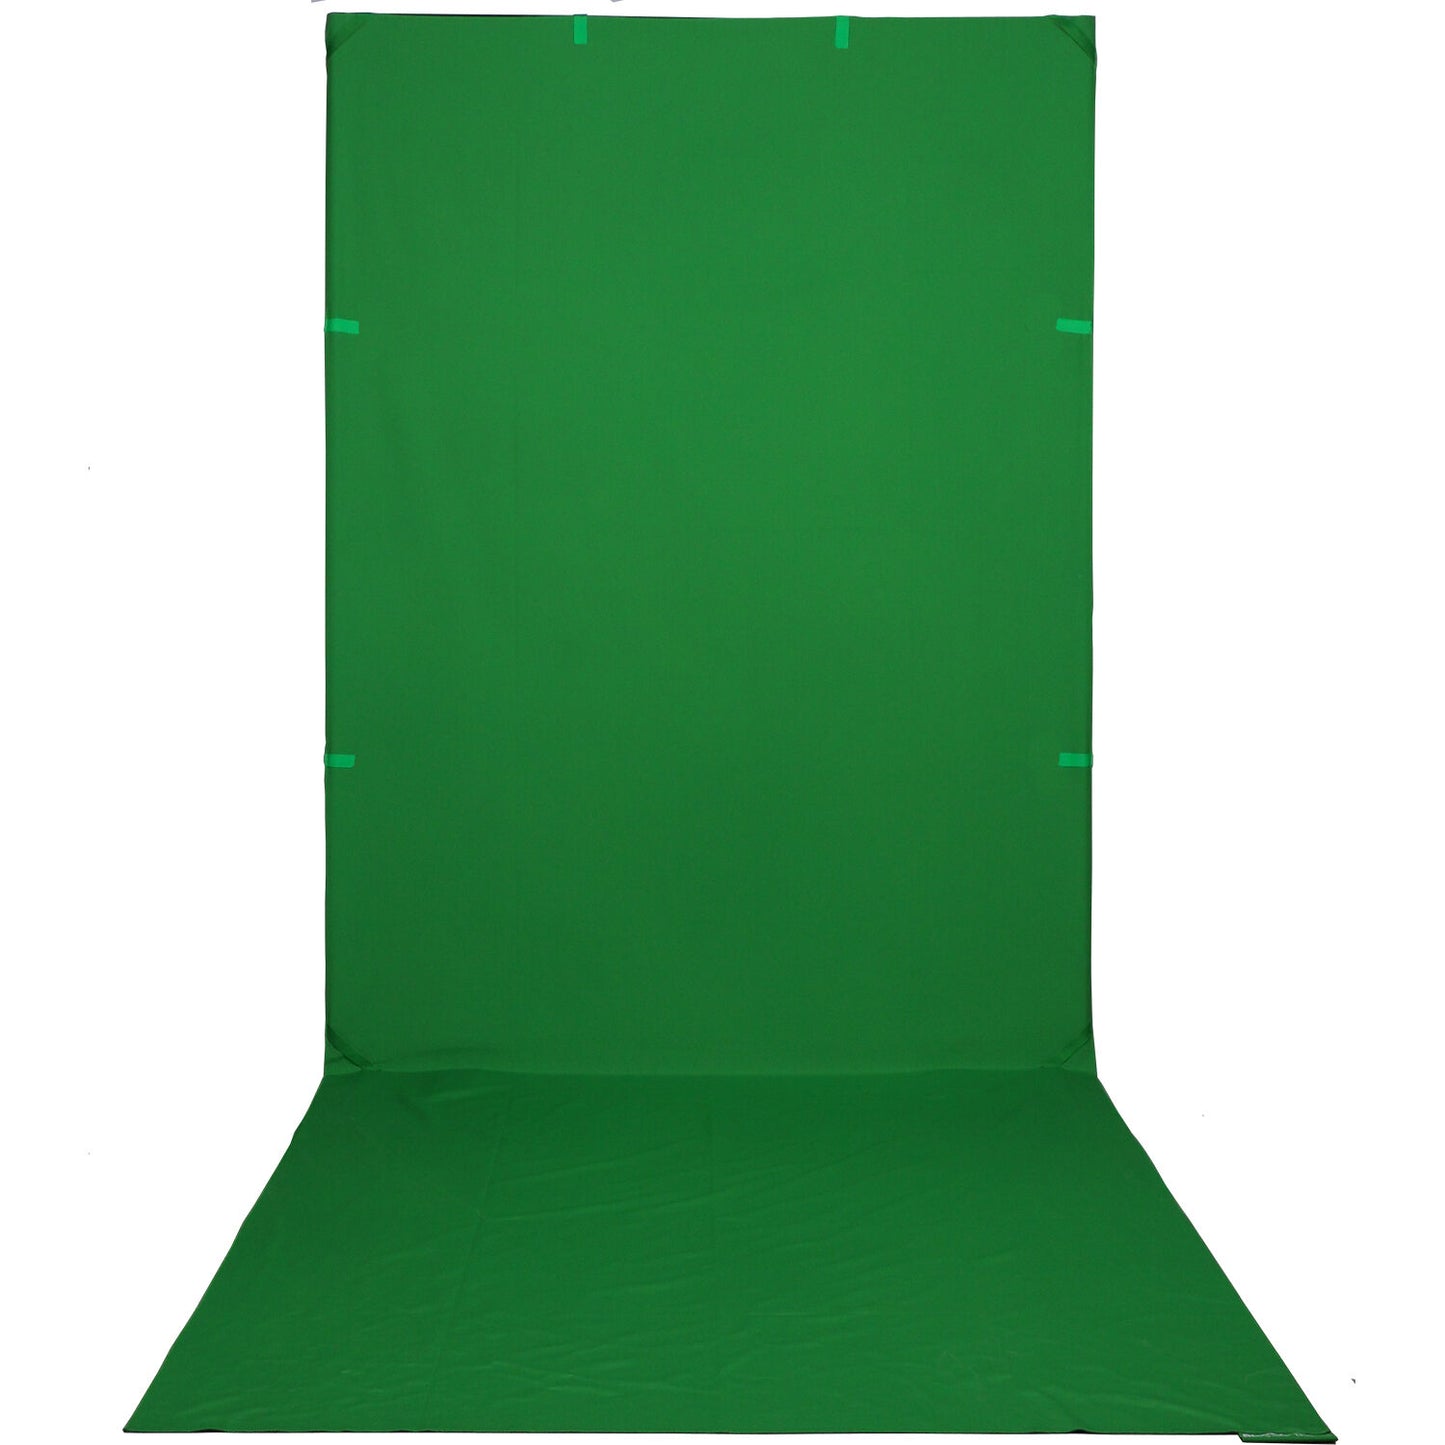 Phottix Q-drop Collapsible Backdrop Kit 5ft by 13ft with 4 Colors Green / Blue and Black / White Cotton Muslin Background PH83432